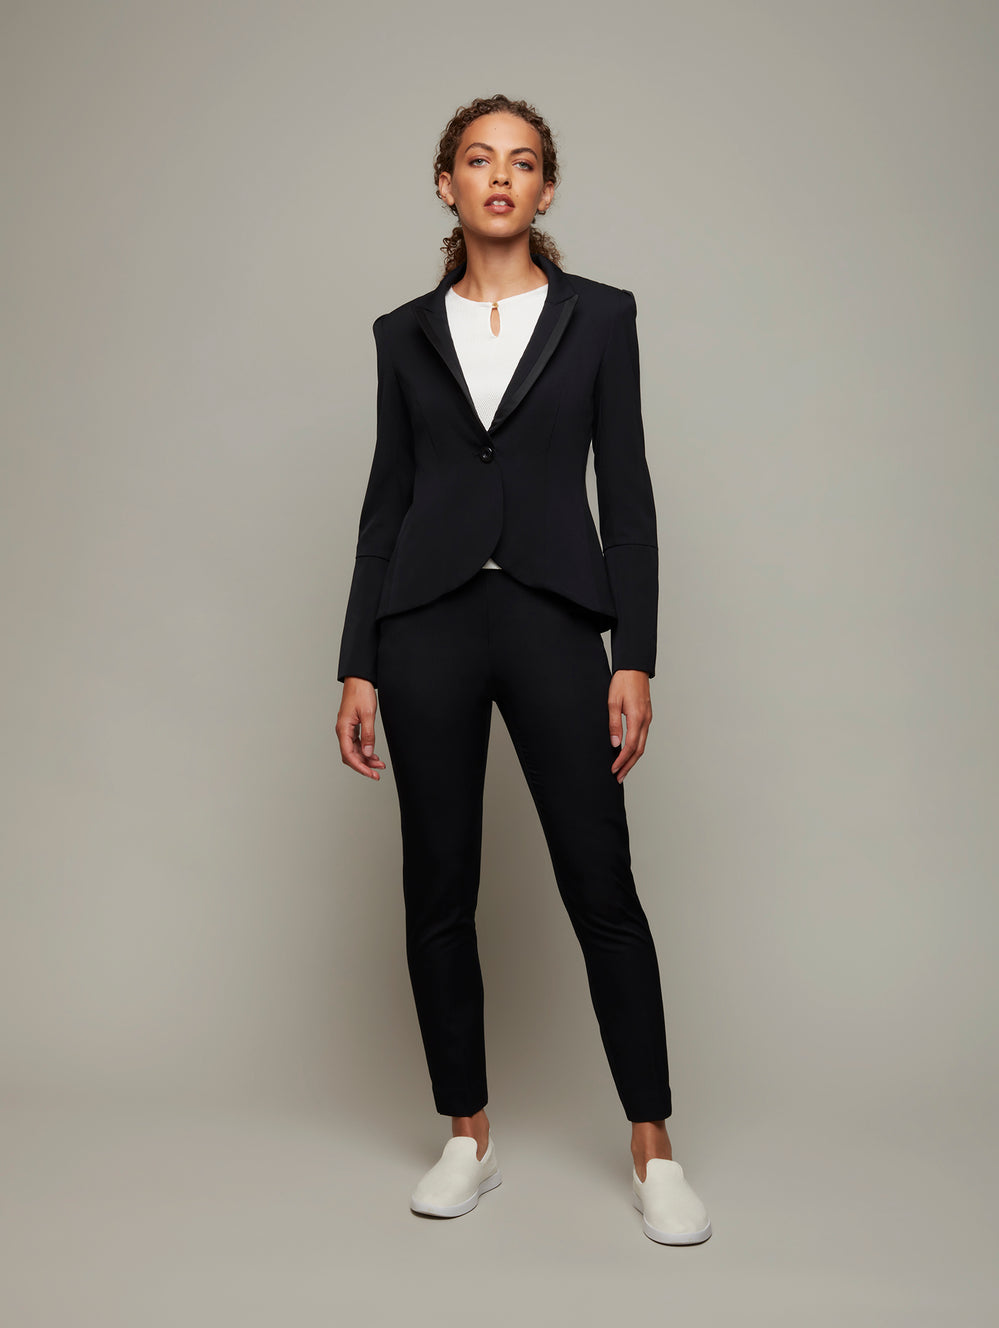 DEPLOY womenswear fitted black suiting tux jacket front view